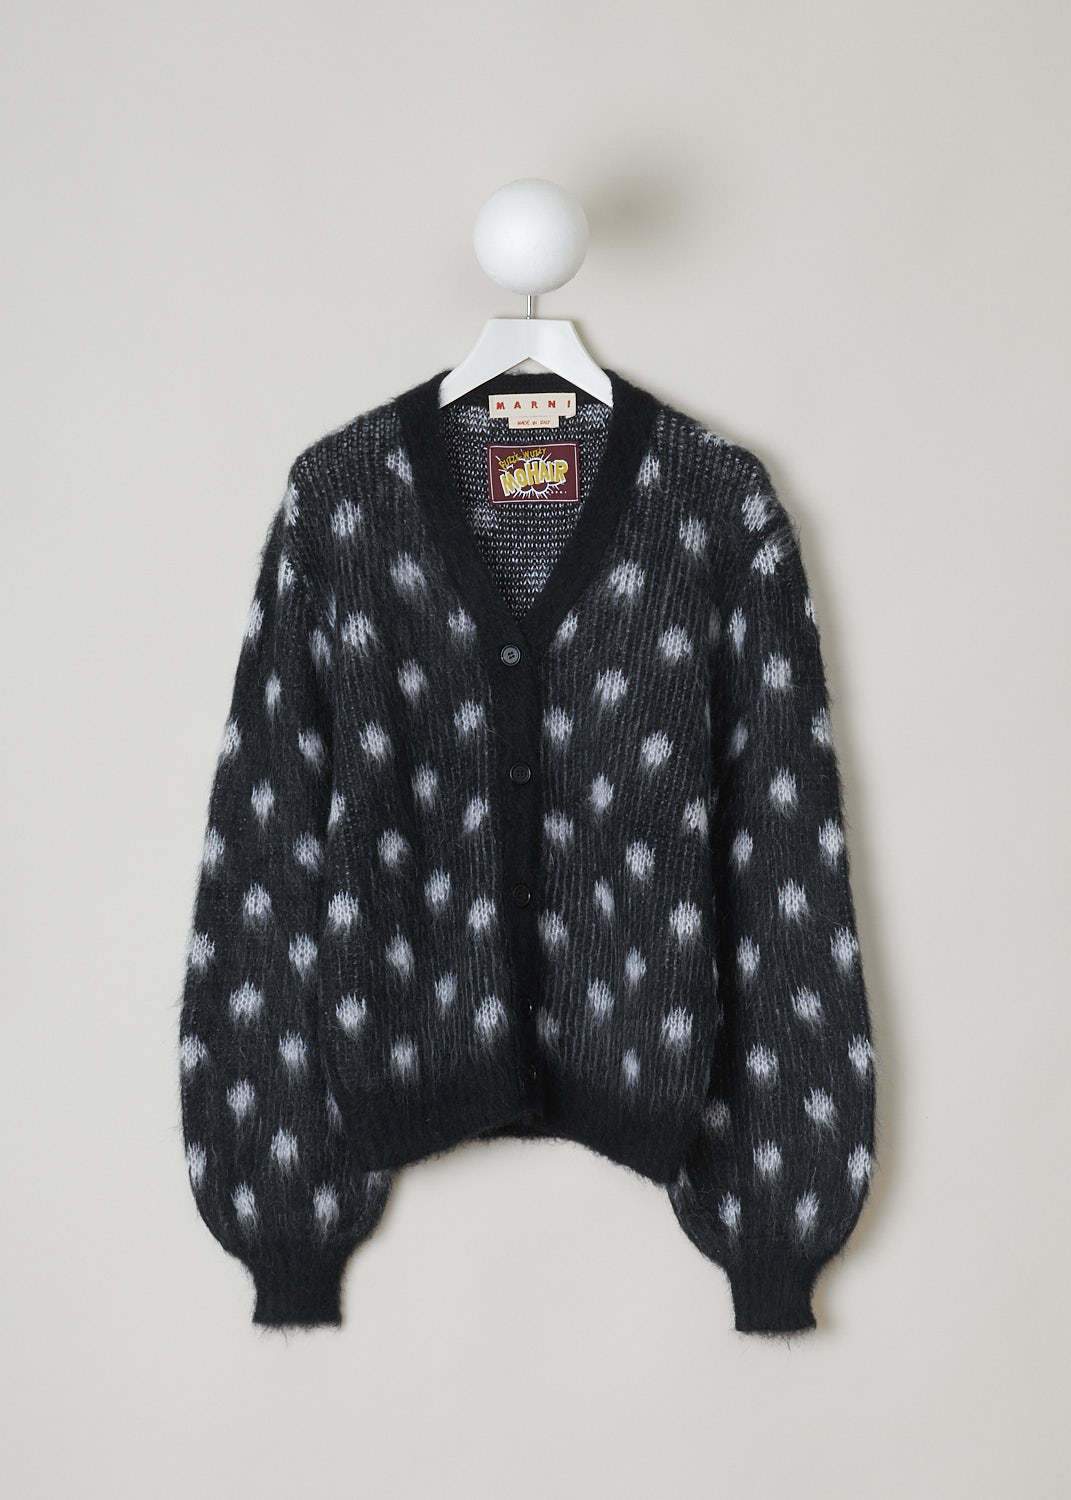 MARNI, BRUSHED DOTS FUZZY WUZZY CARDIGAN, CDMD0326Q0_UFU160_DON99, Black, Print, Grey, Front, This brushed dots Fuzzy Wuzzy cardigan has a black V-neckline with a front button closure. The sweater has a two-tone dot pattern in black and grey. The long balloon sleeves have ribbed cuffs. That same ribbed finish can be found on the hemline.
